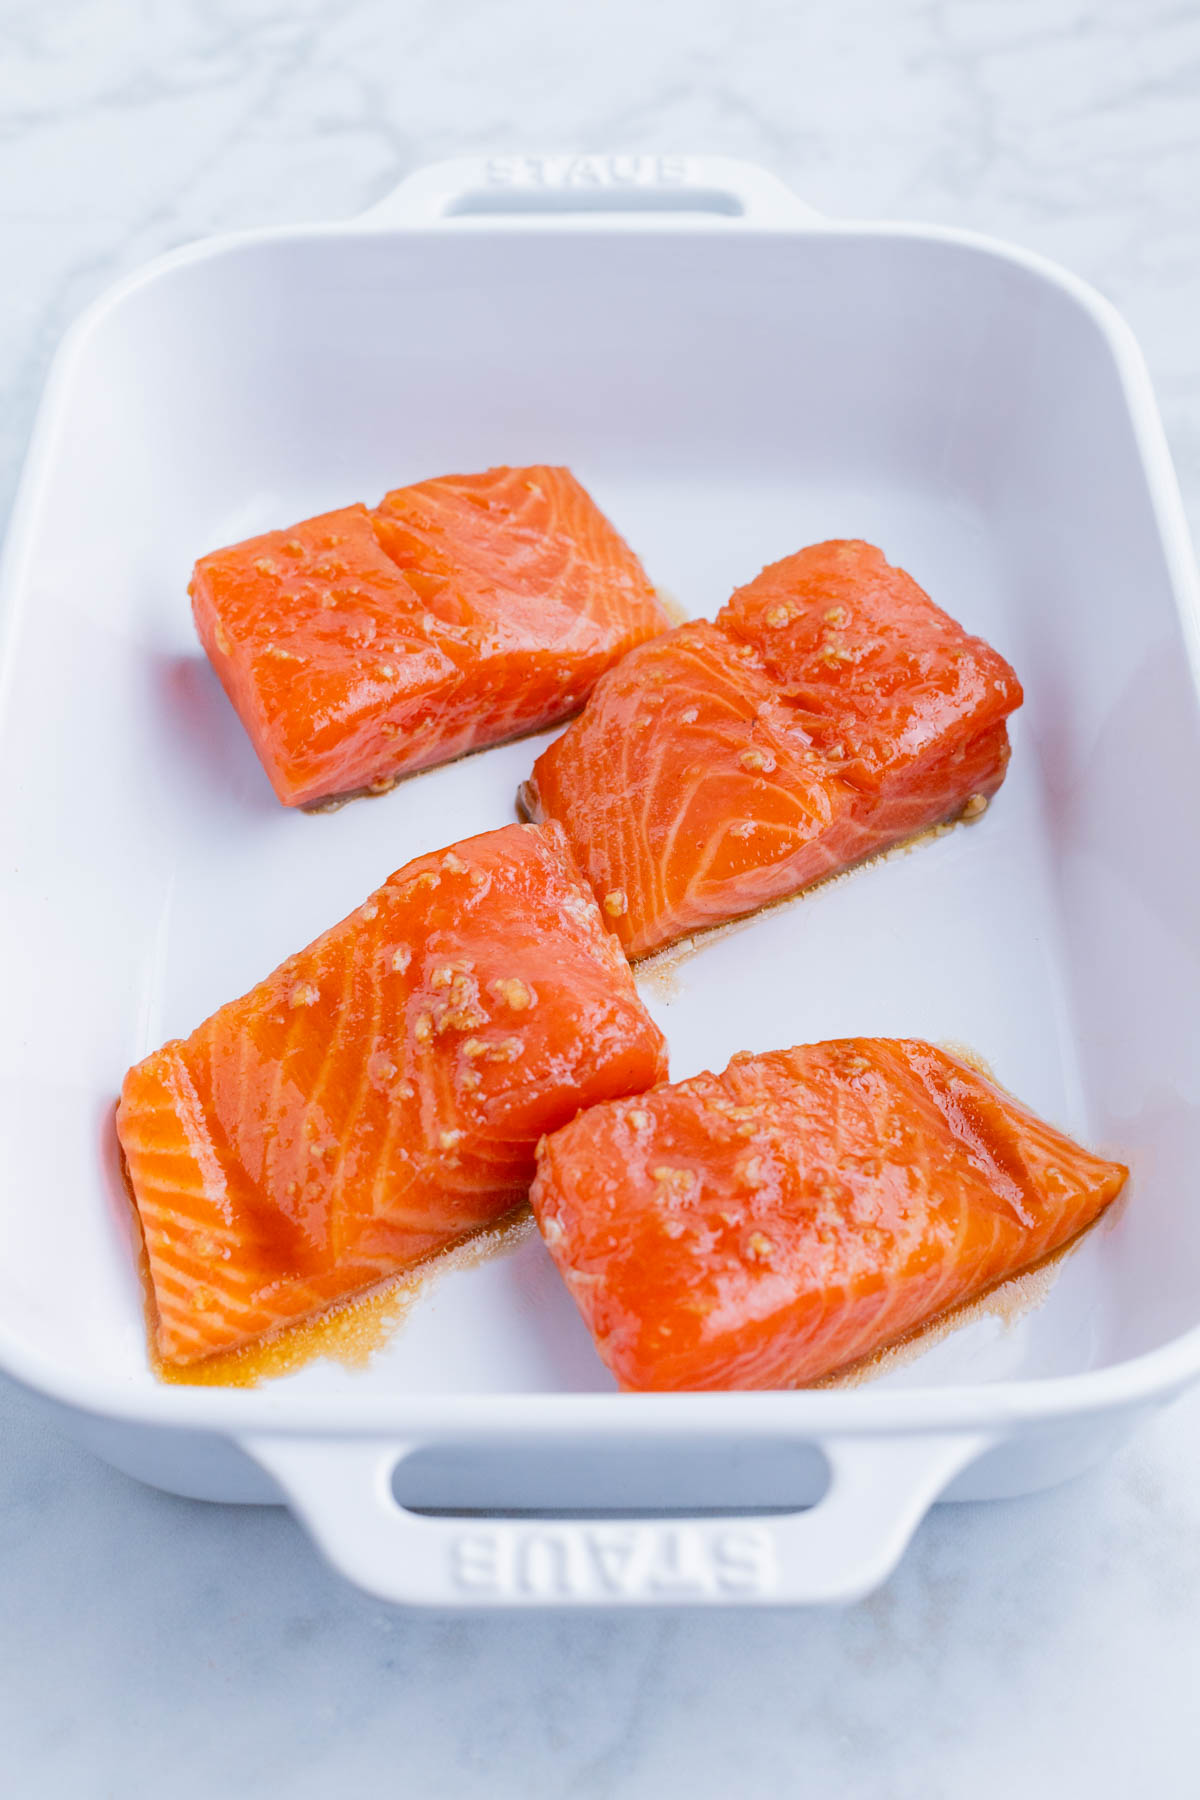 Marinated salmon fillets are baked in a casserole dish.